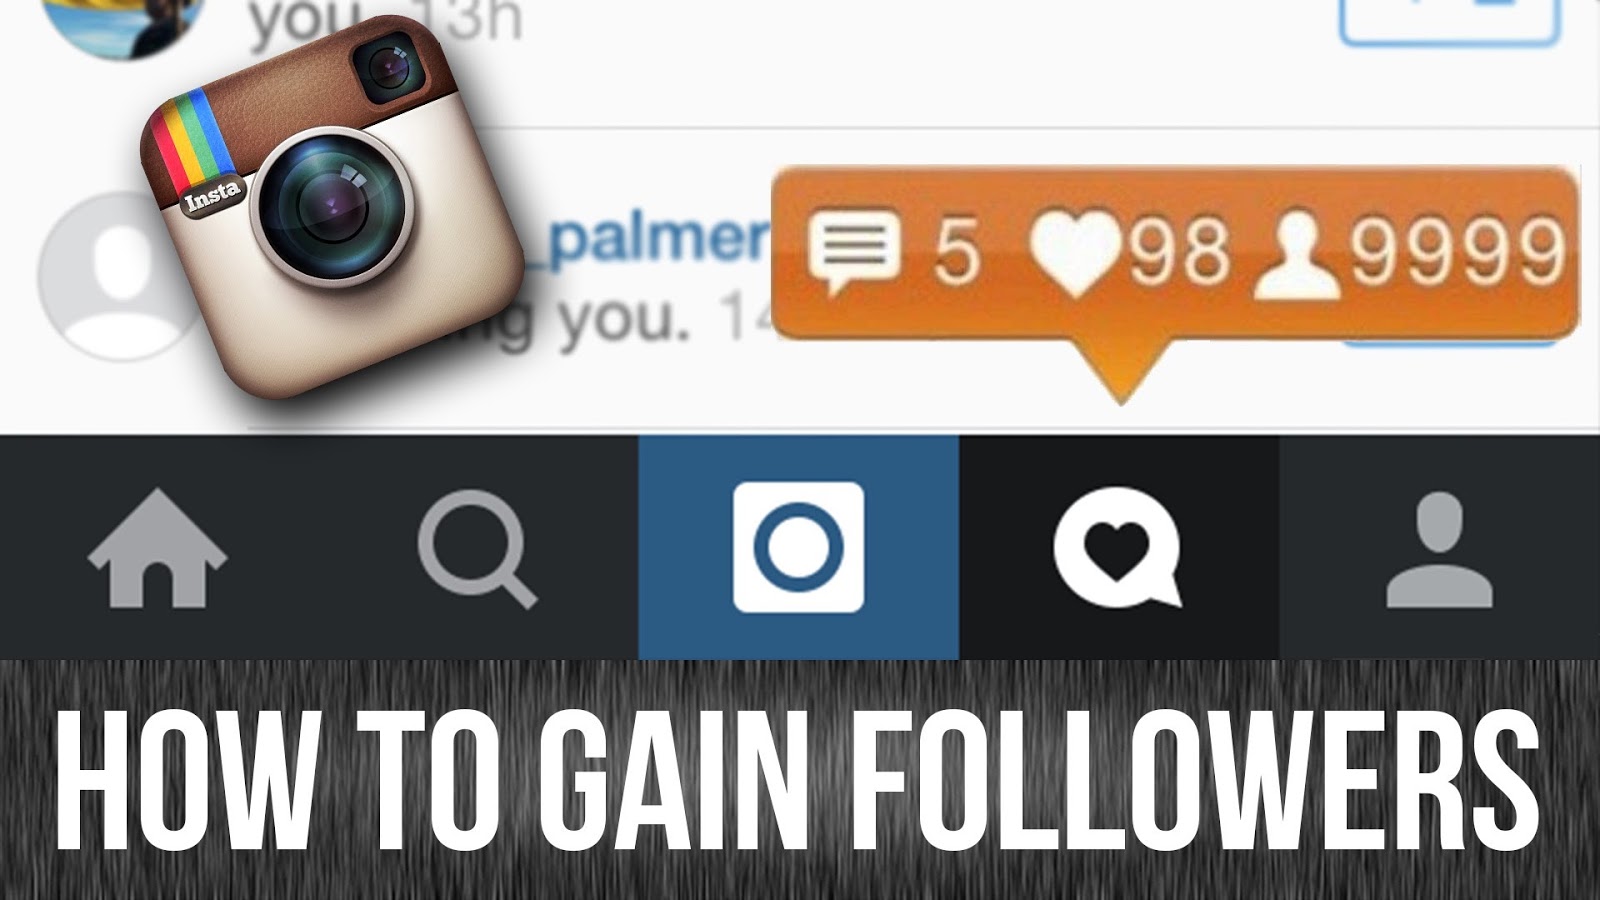 get instagram followers android